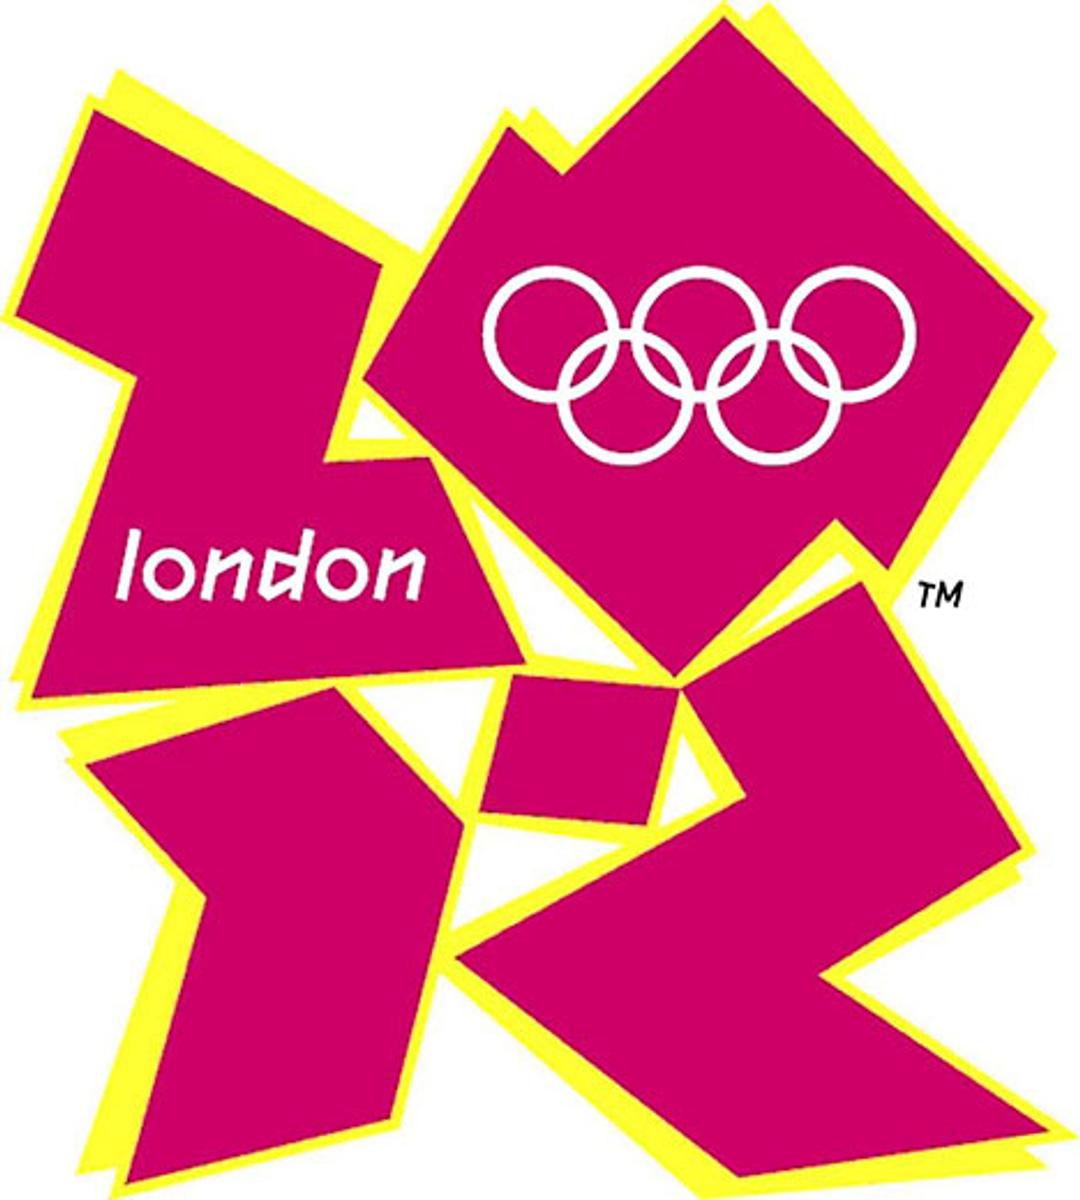 The 2012 London Olympics logo was an infamous branding blunder | Source